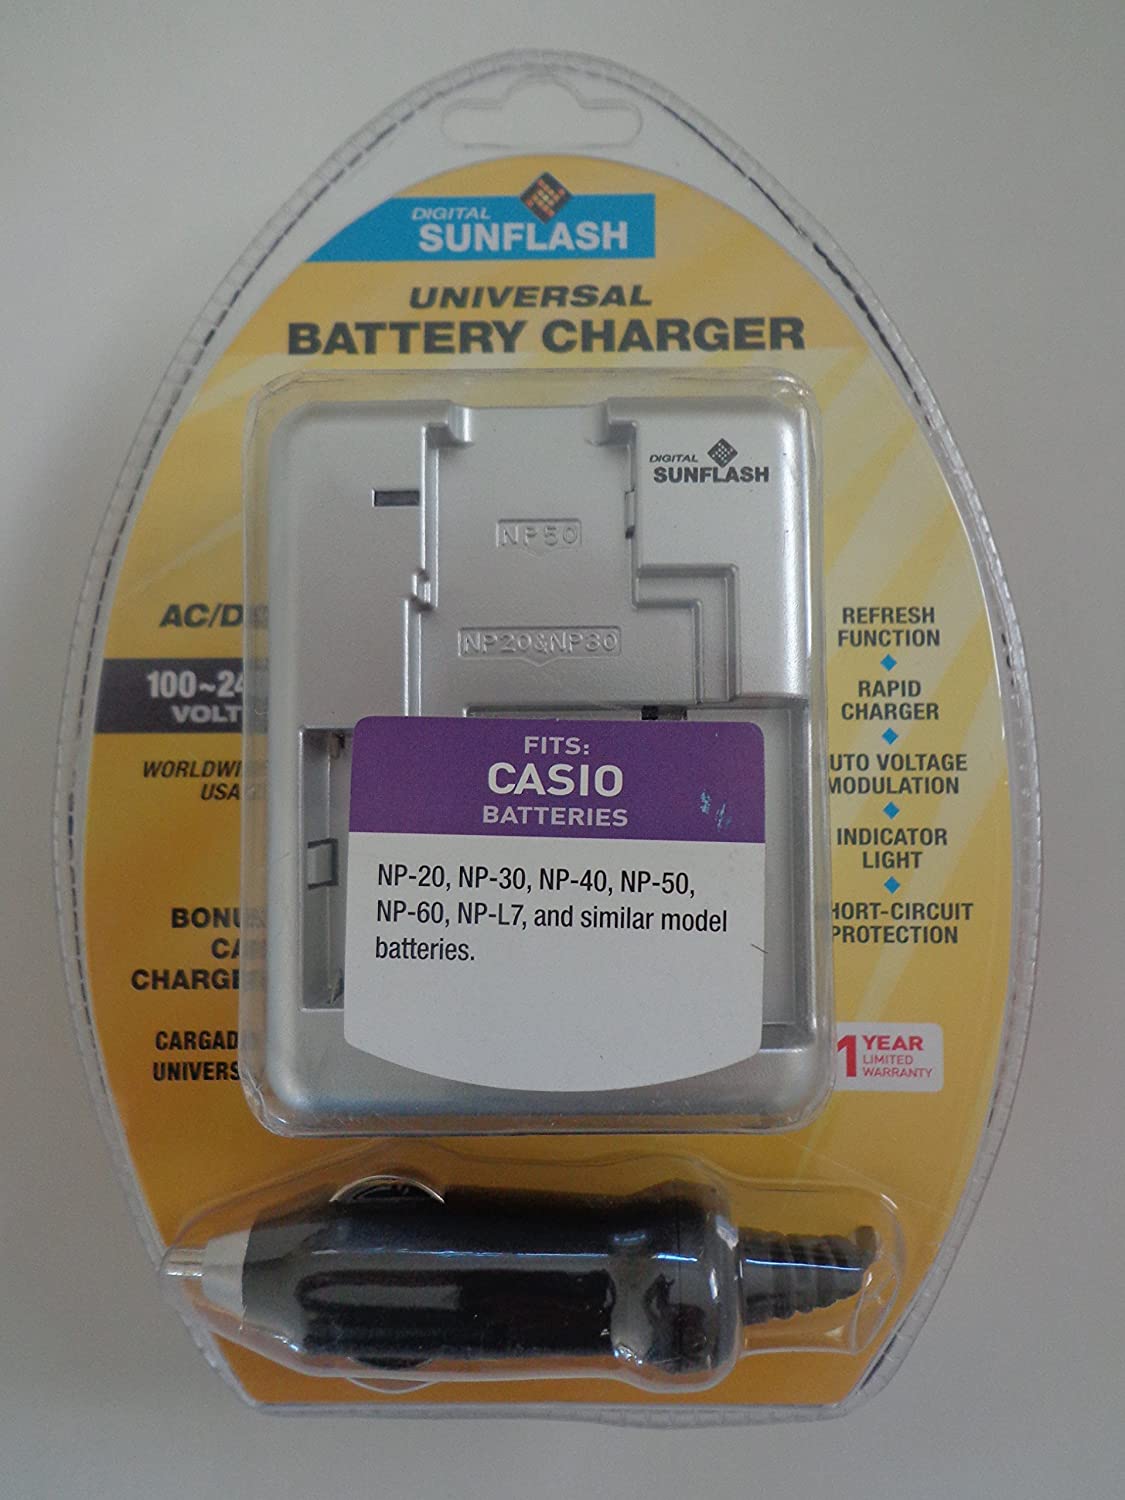 Digital Sunflash Universal Battery Charger F/Casio.